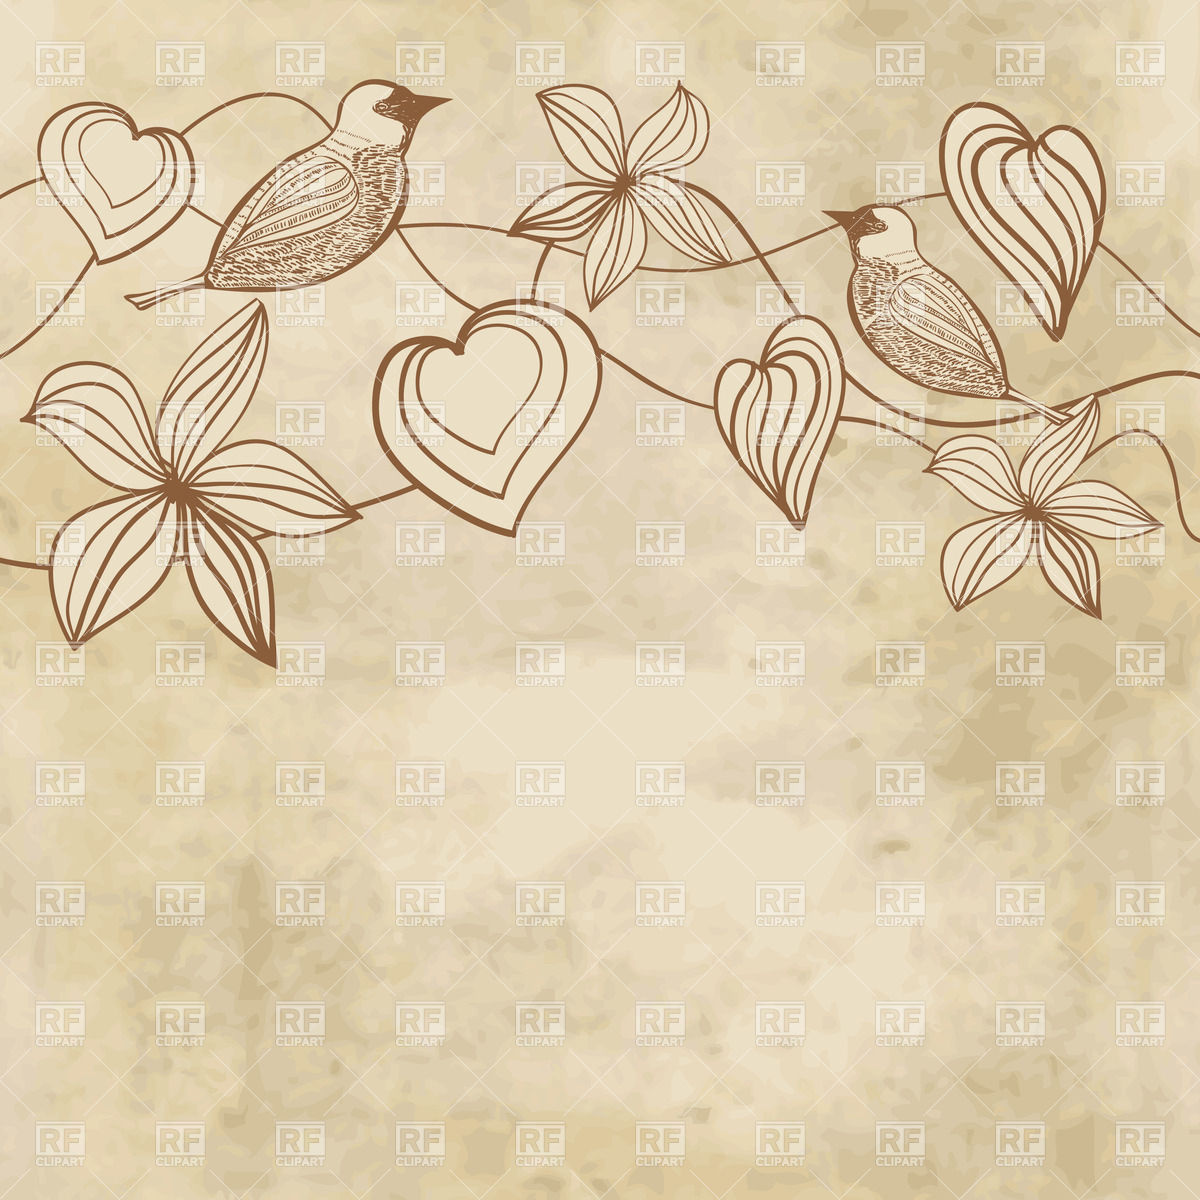 Romantic Vintage Card With Birds And Floral Plant On Worn Background